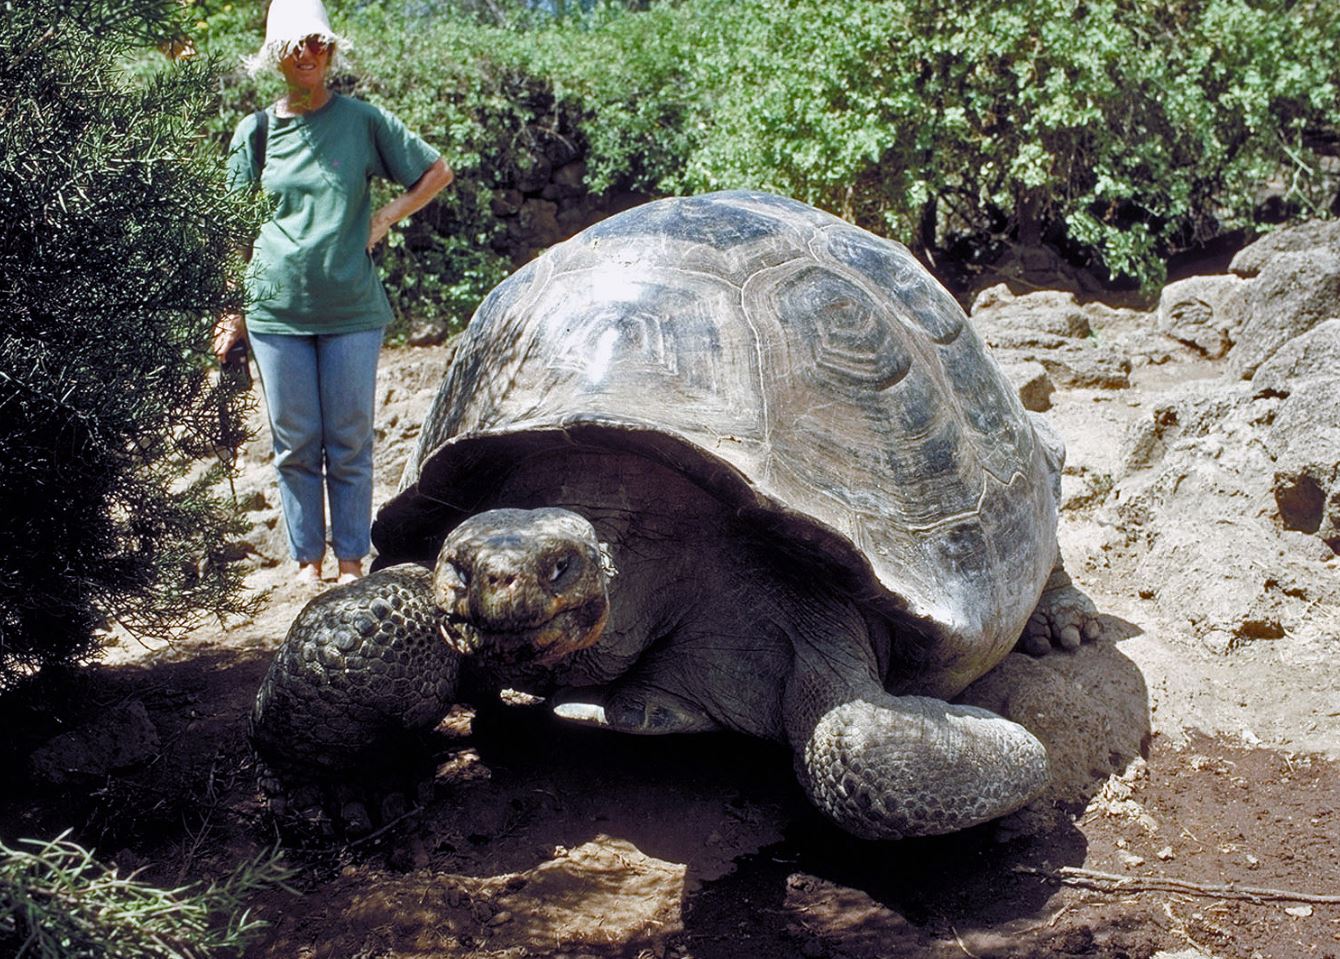 The Galapagos archipelago was once home to 15 species of turtles.